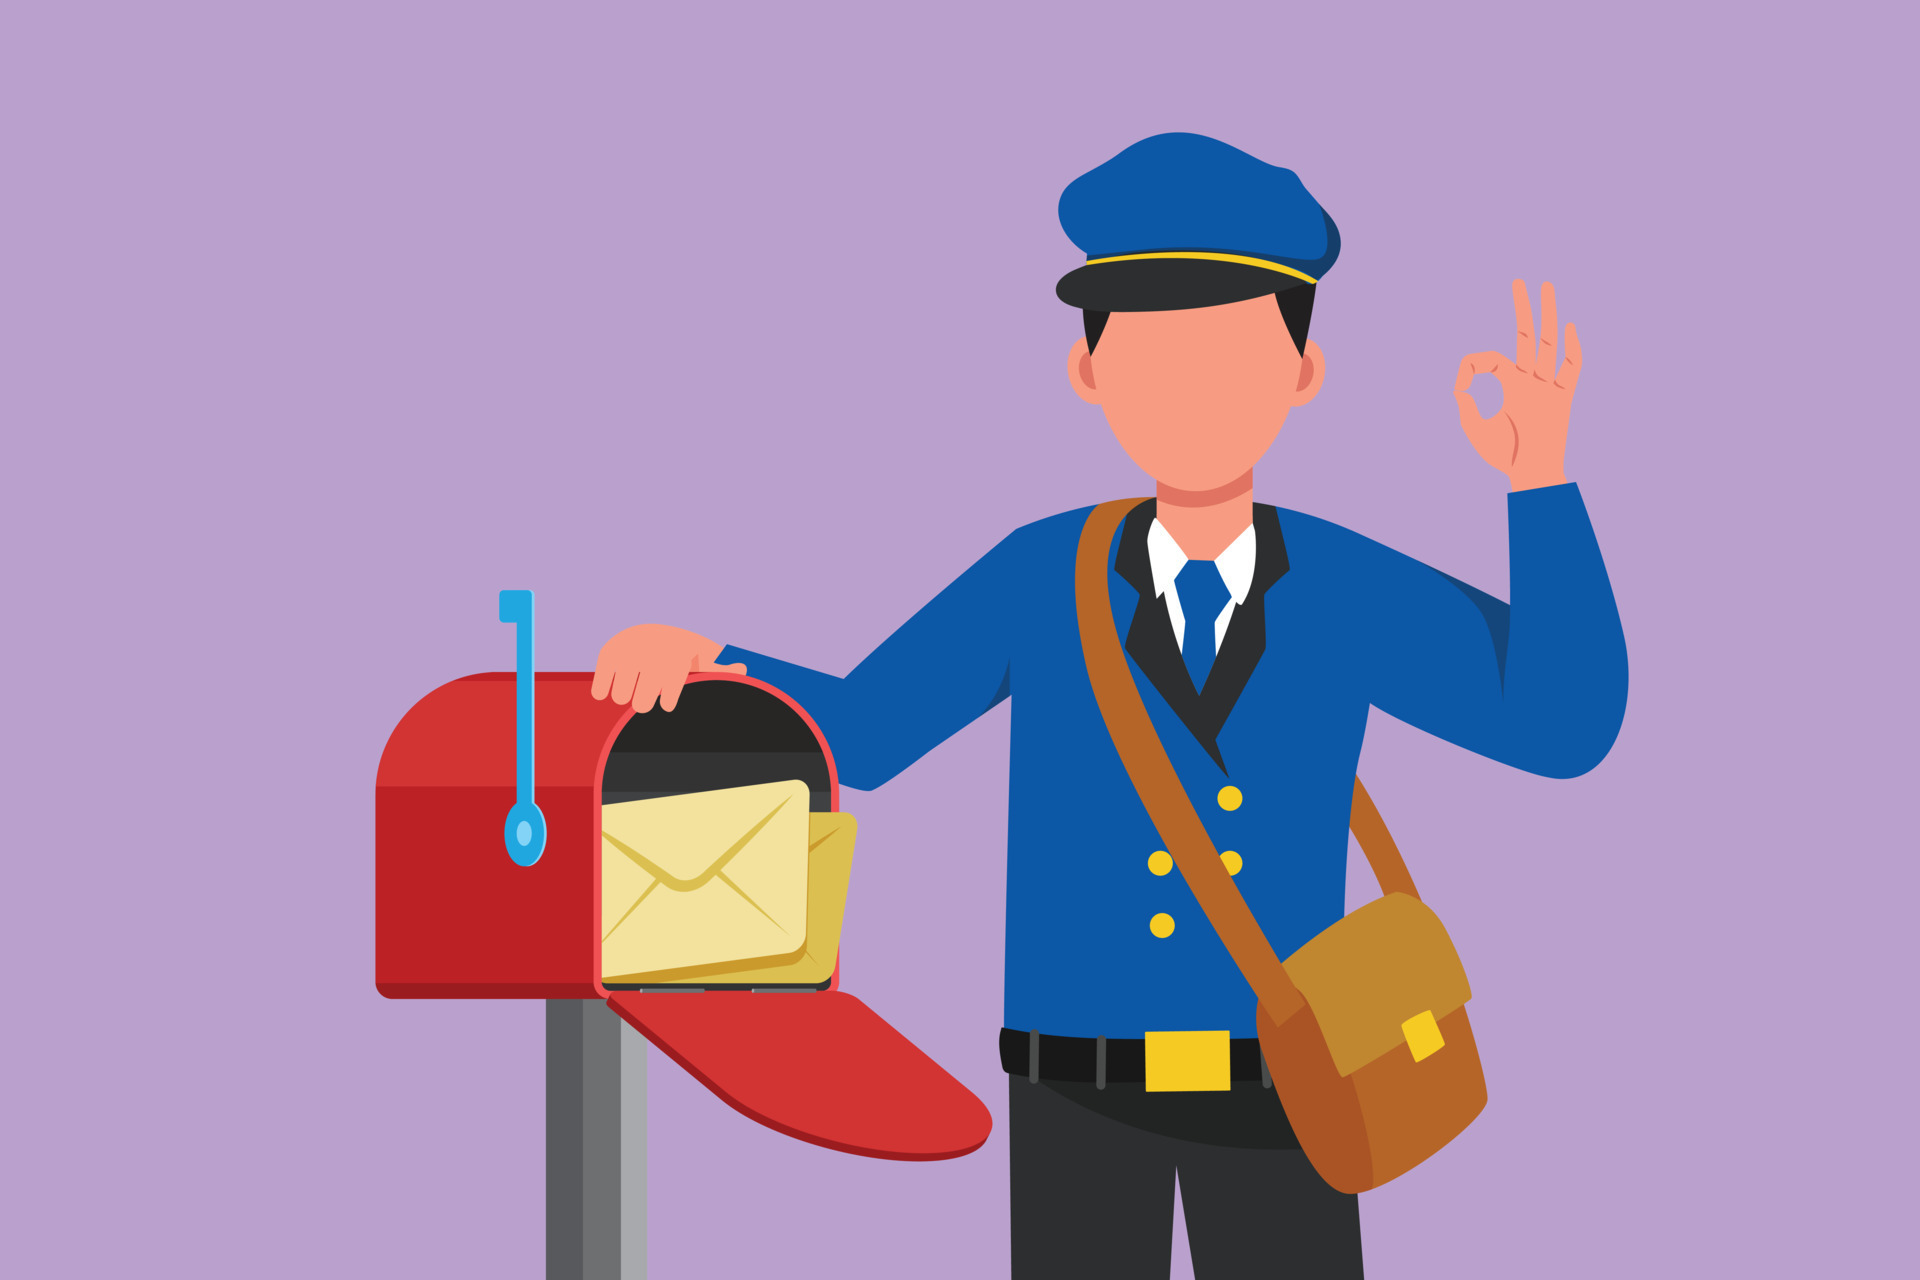 Character flat drawing attractive postman holding envelope on mail box with  okay gesture, wearing hat, bag, uniform, working hard to delivery mail to  home address. Cartoon design vector illustration 19133771 Vector Art